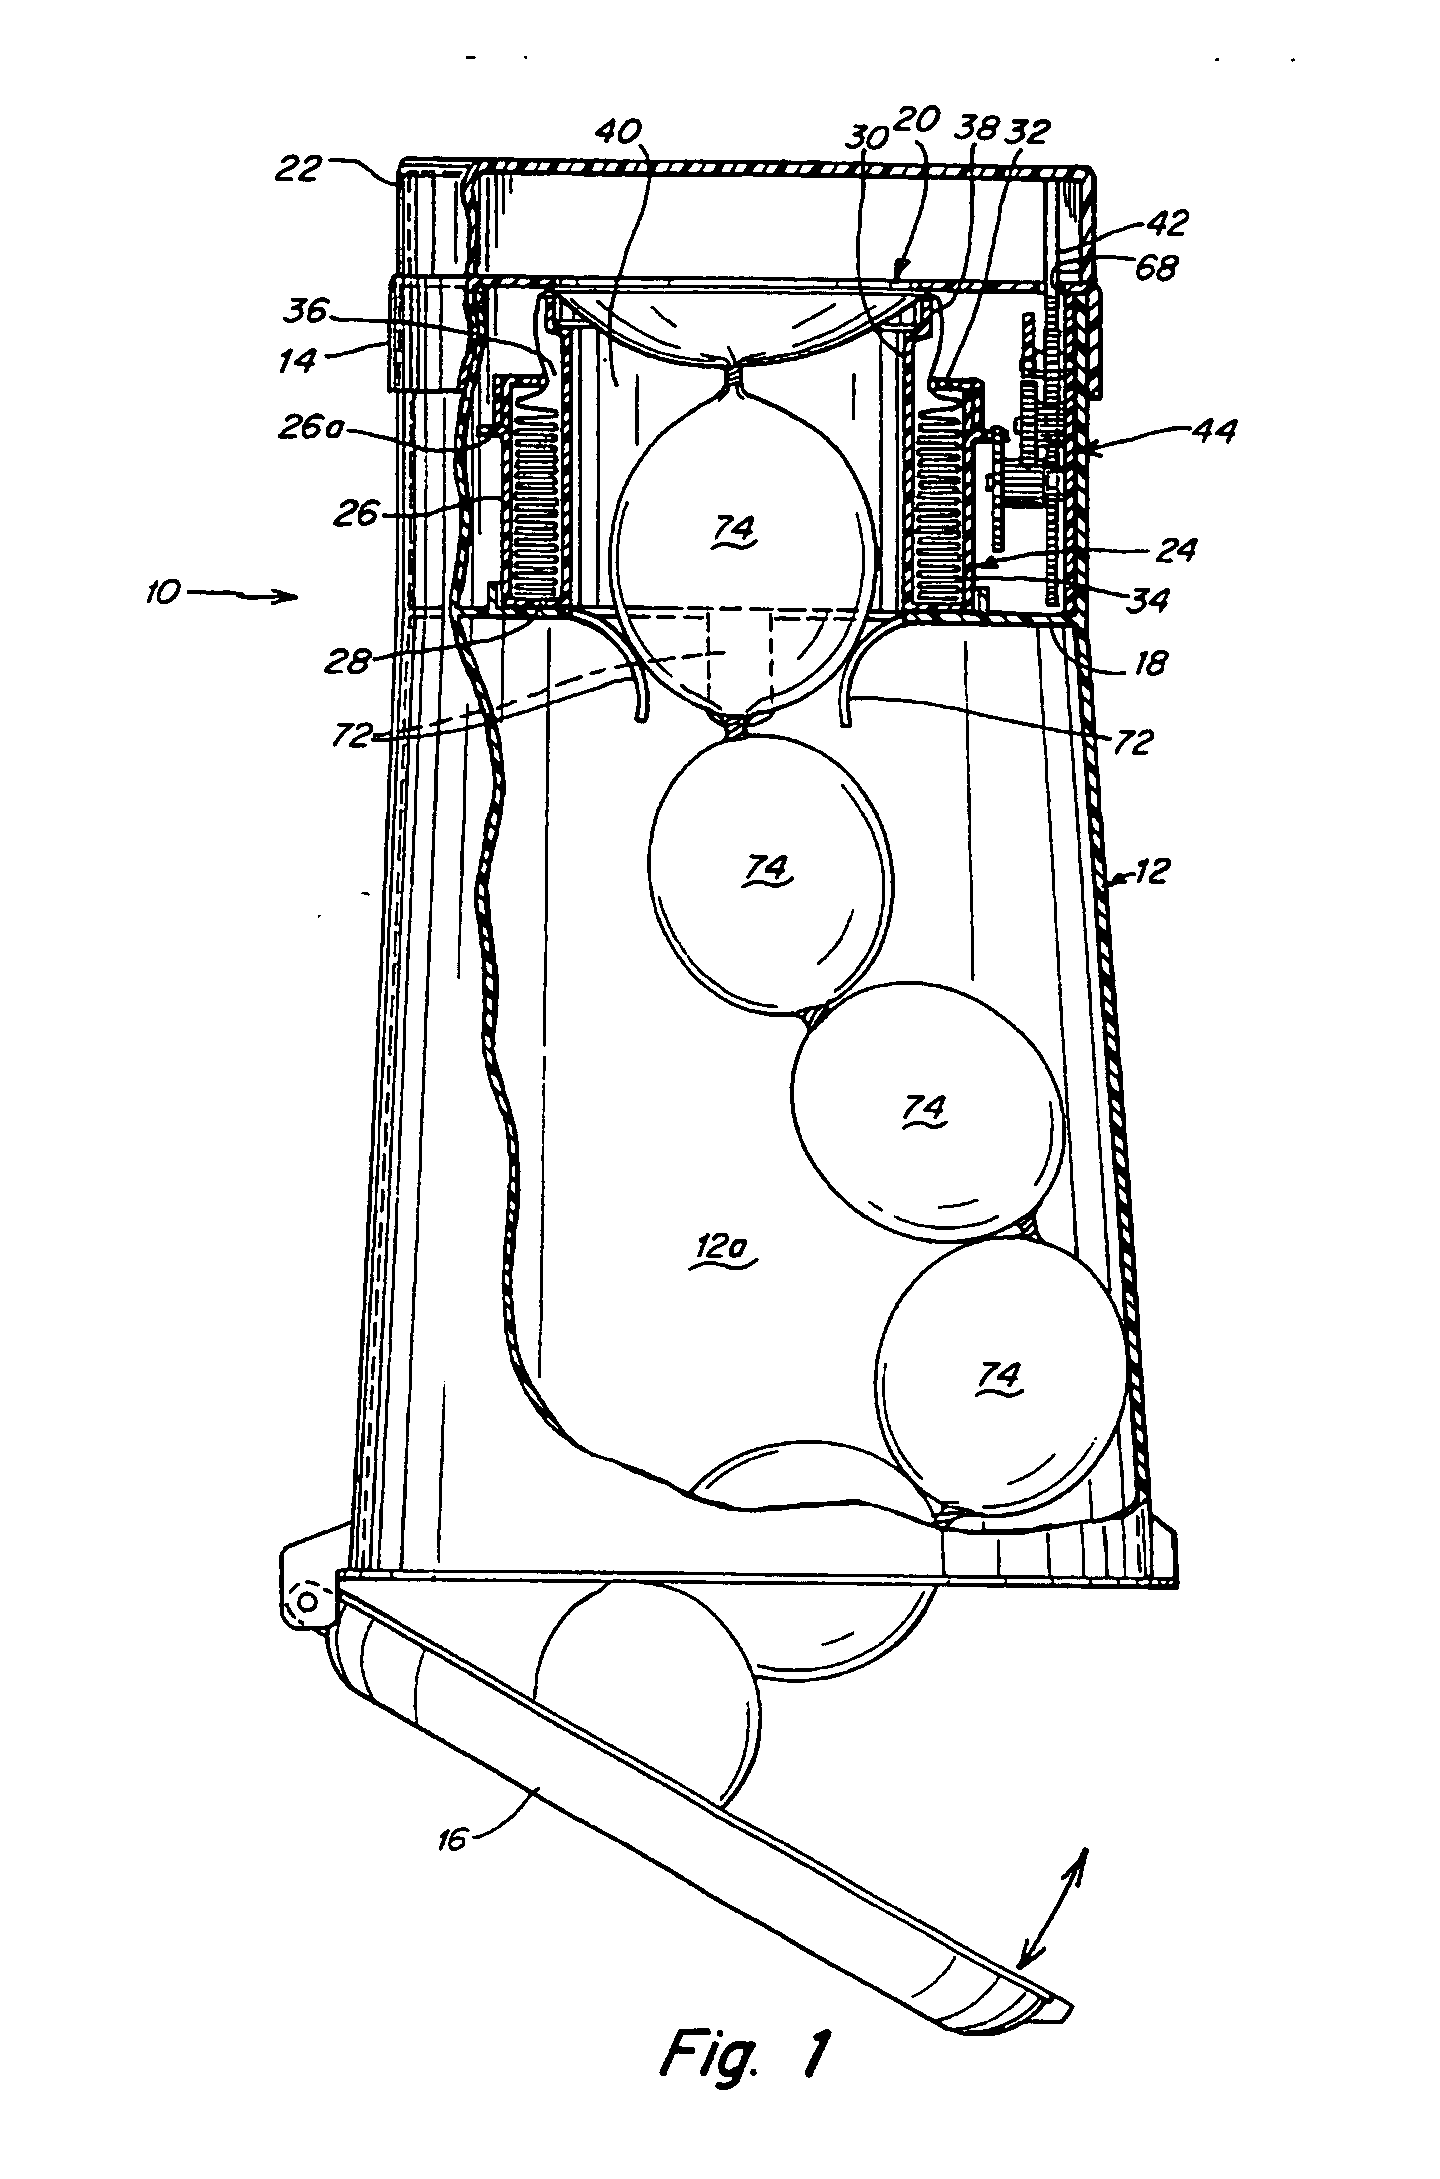 Waste disposal device including a hamper accessible through a movable door